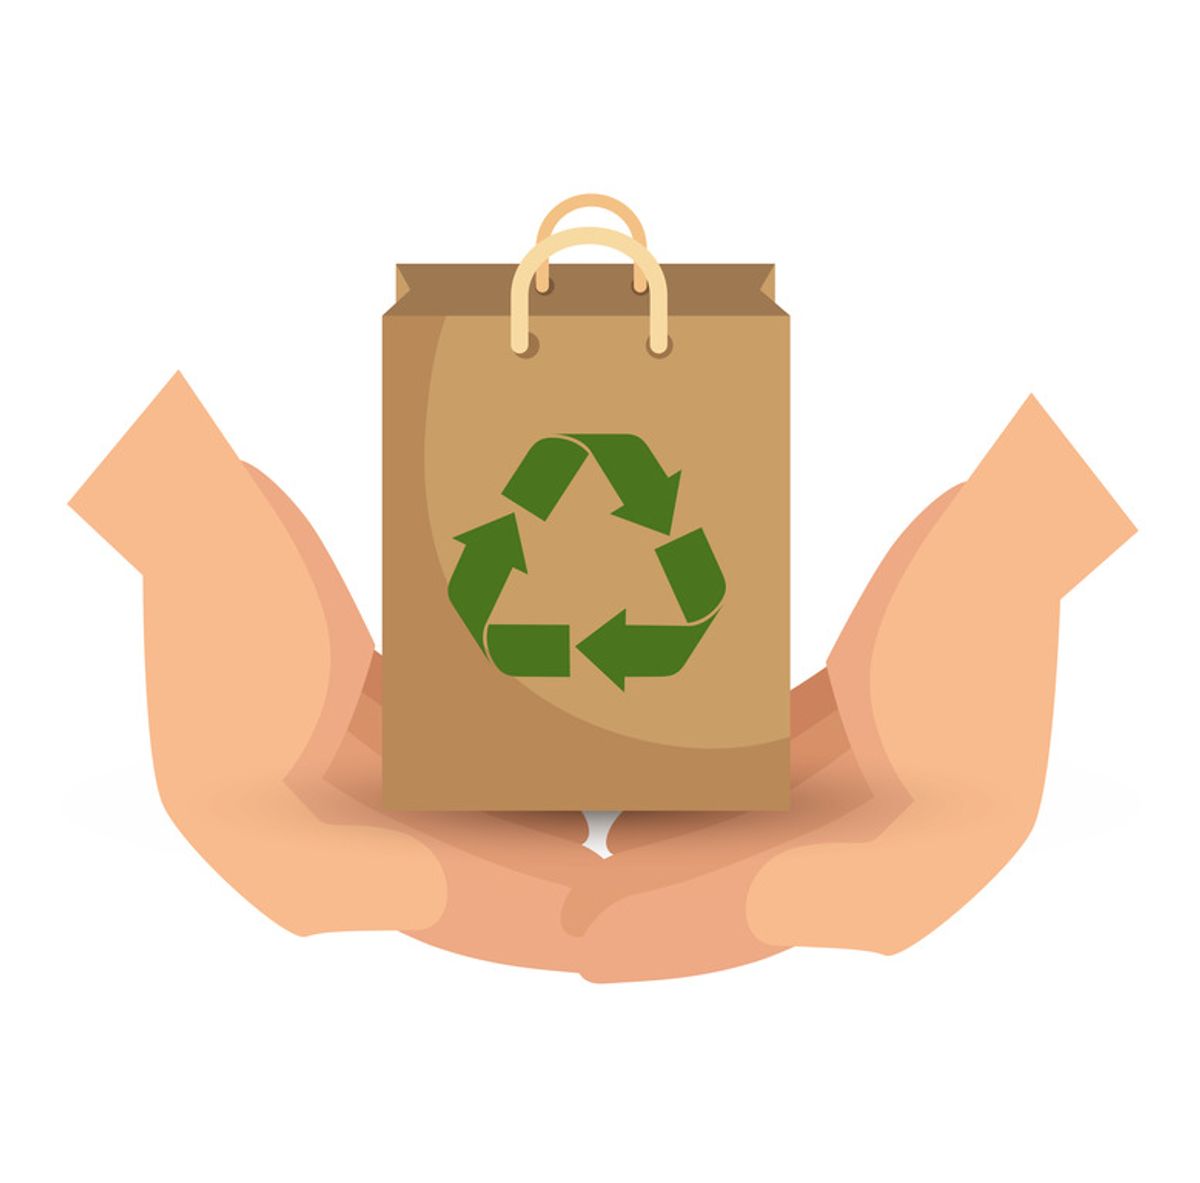 The Lifecycle of a Paper Bag: From Production to Recycling